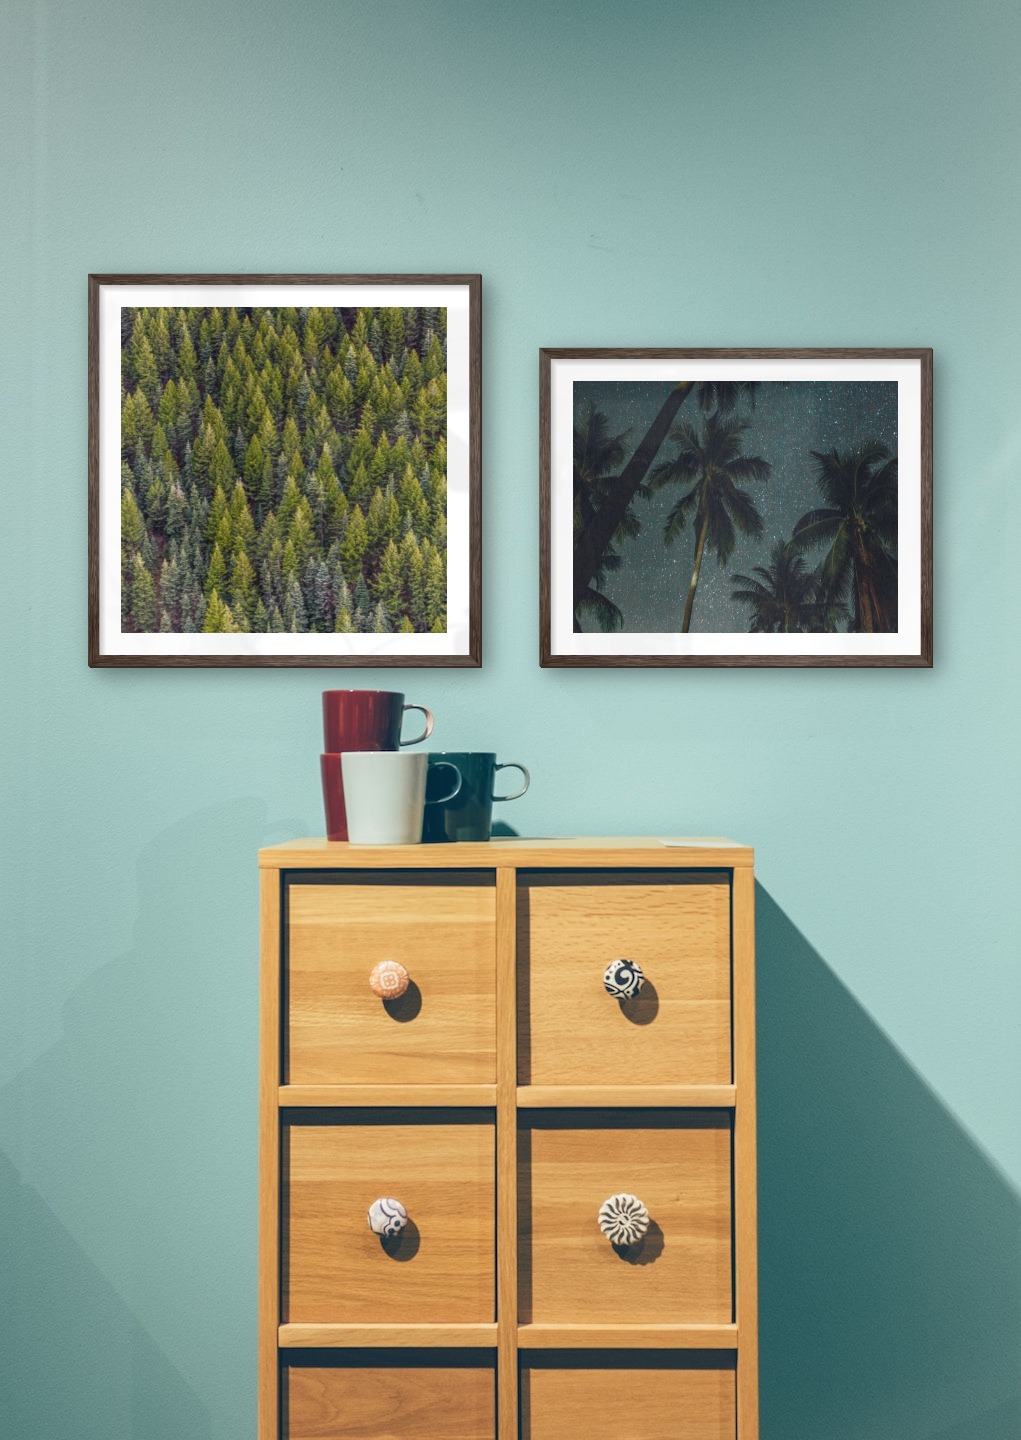 Gallery wall with picture frames in dark wood in sizes 50x50 and 40x50 with prints "Trees from above" and "Palm trees and night sky"